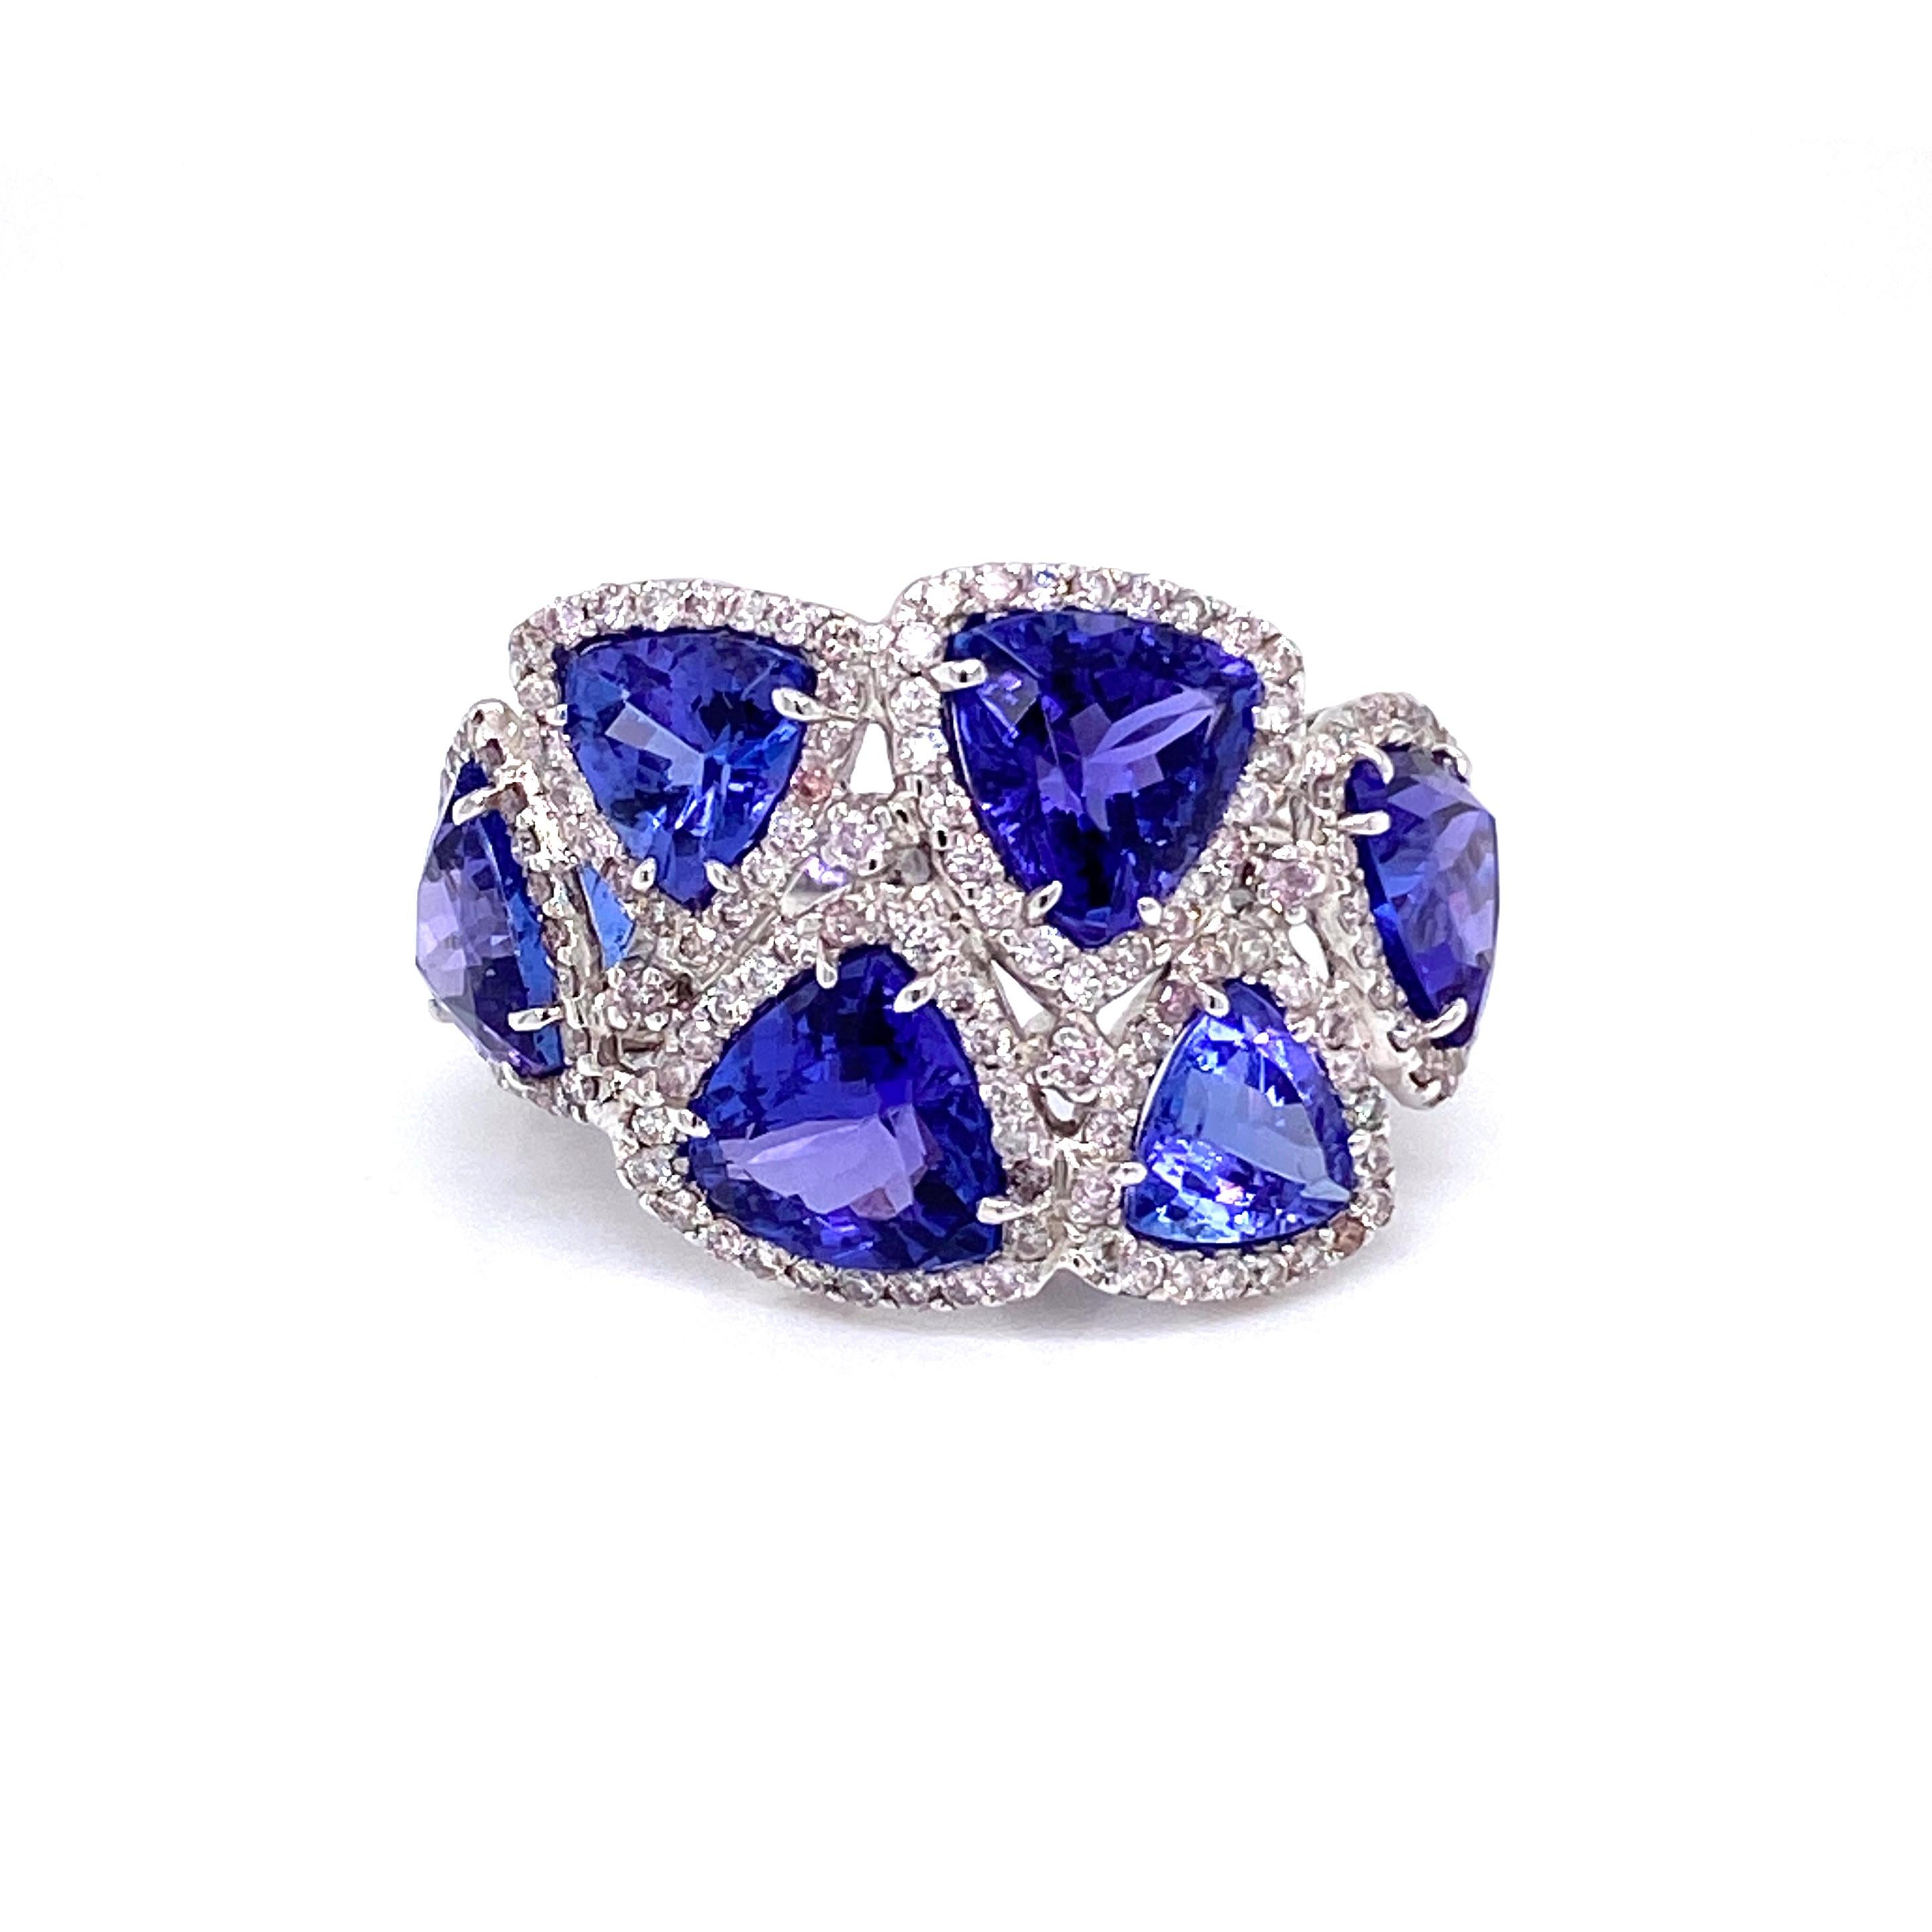 This stunning cocktail ring features six Trillion Tanzanites (total of 7.86 Carats) surrounded by Round White Diamonds (total of 1.08 Carats). 
This ring is set in 18k White Gold. Ring Size is 6 1/2.